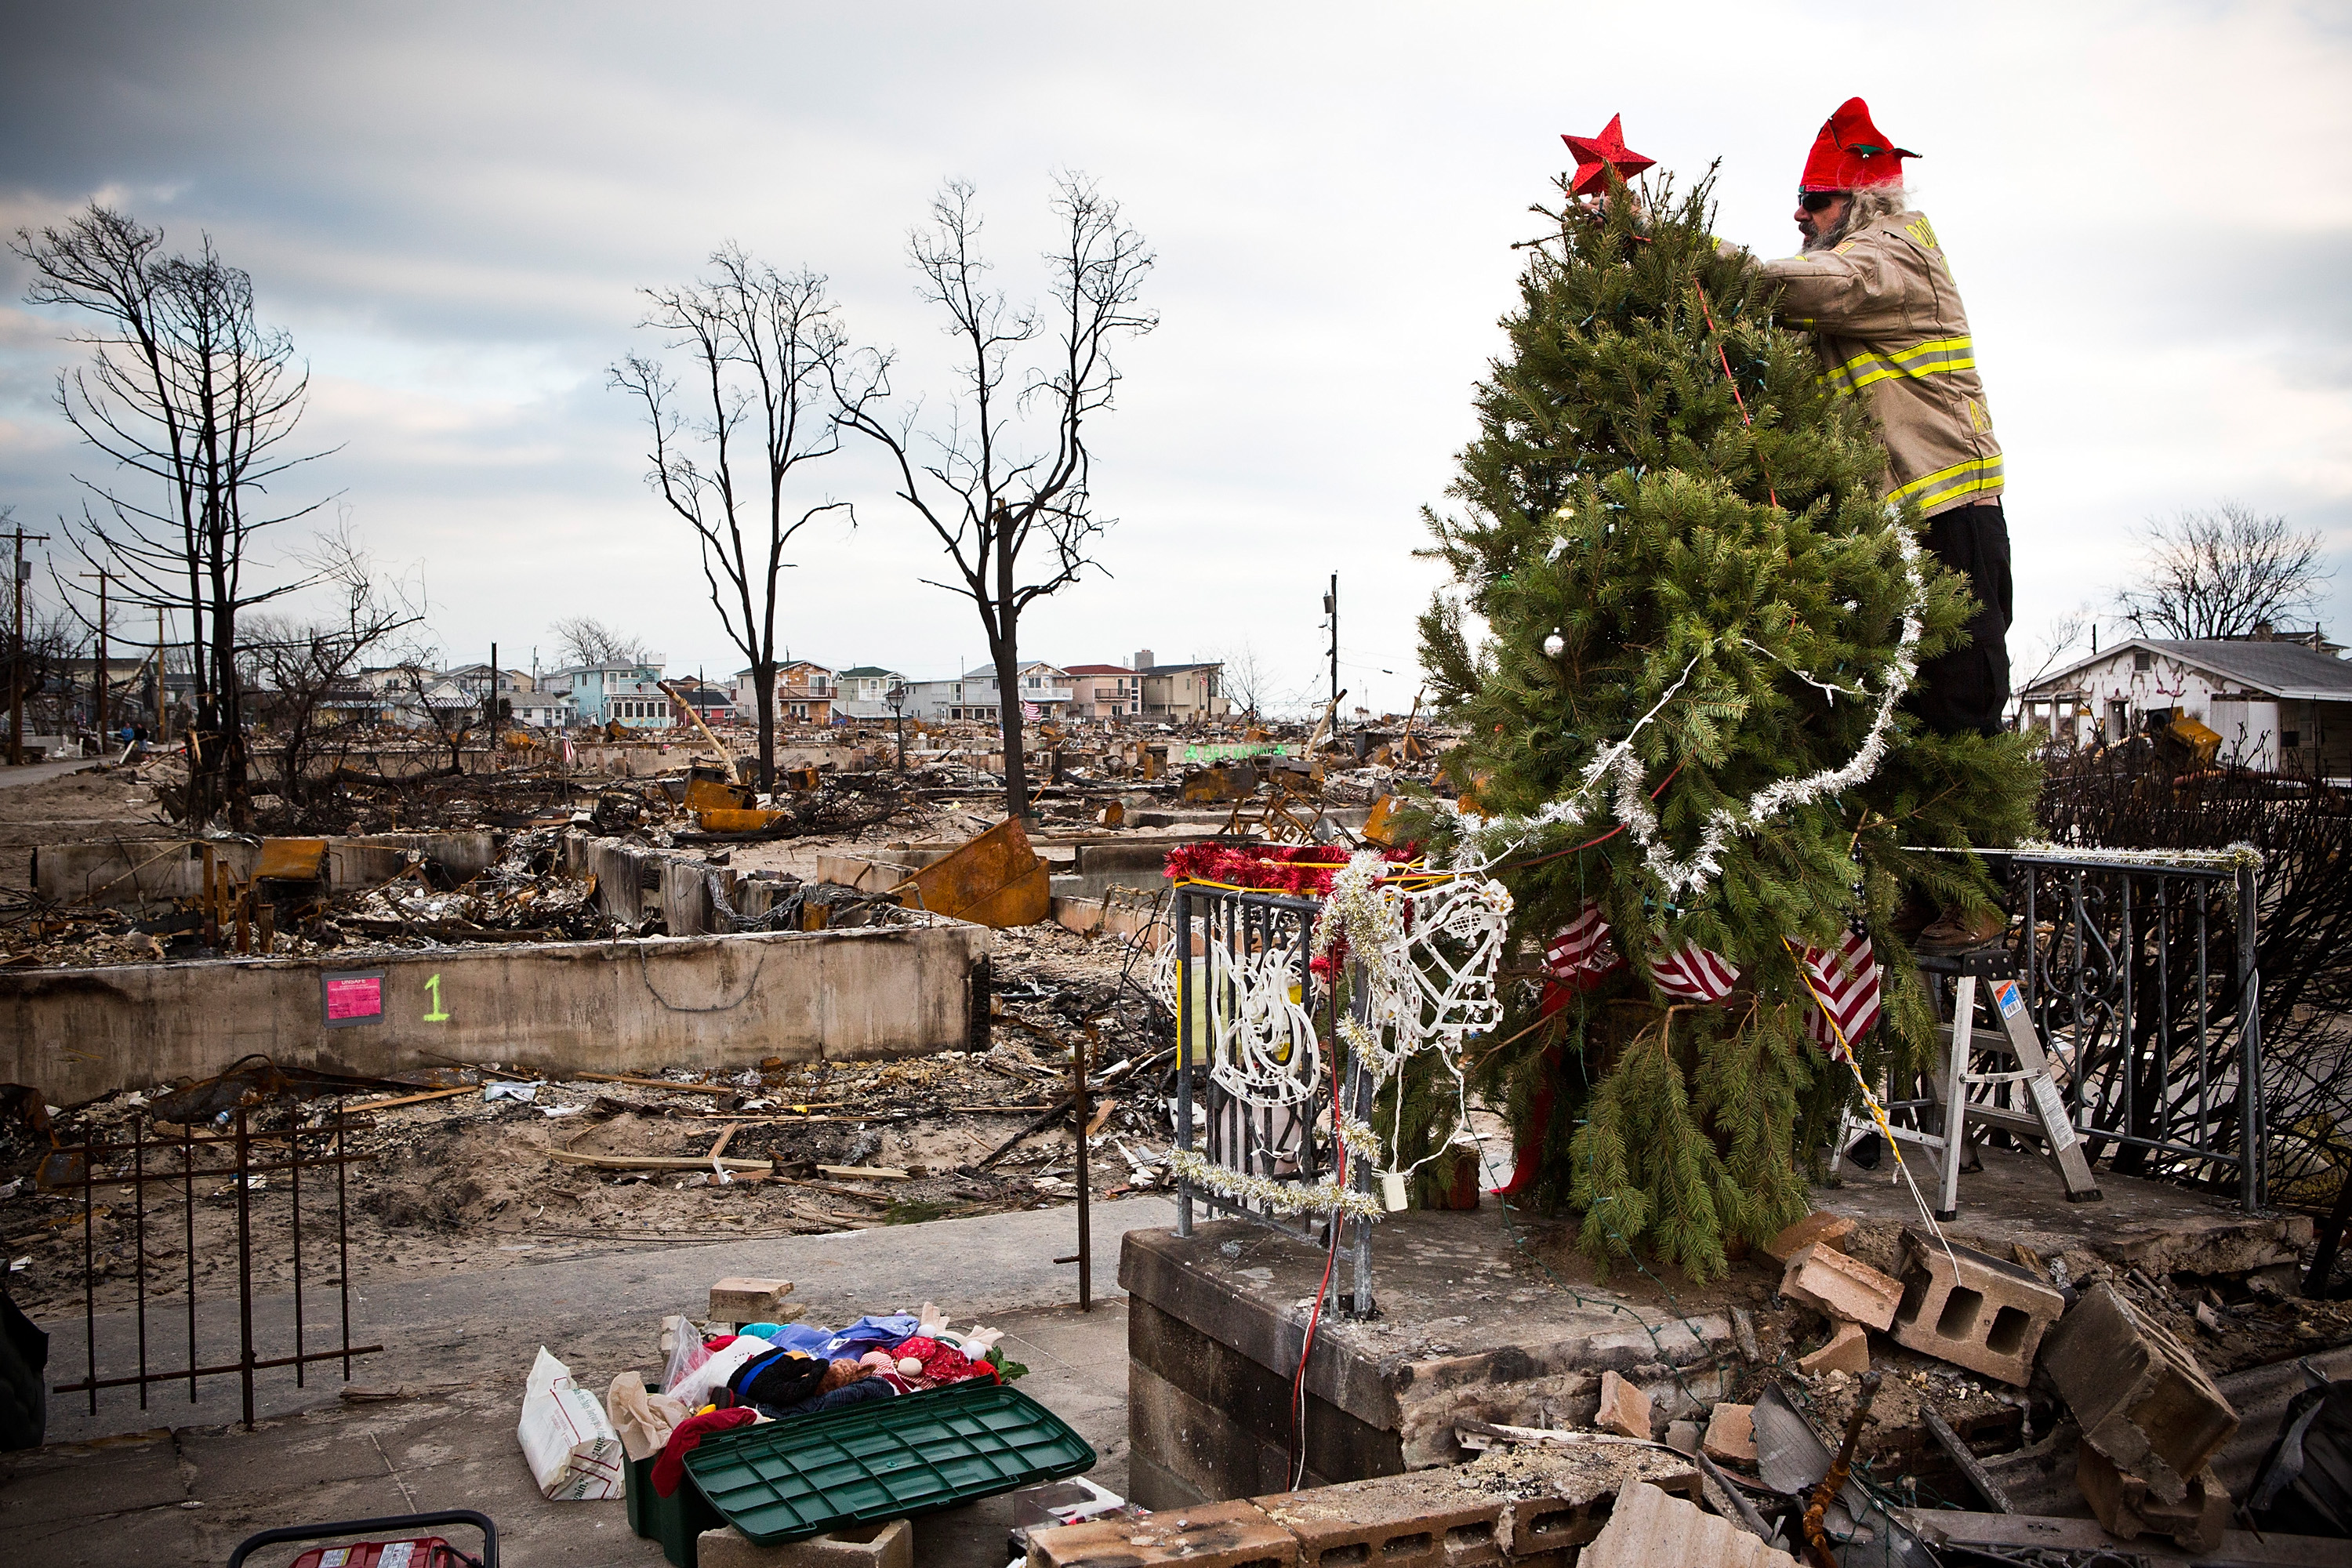 Edward "Roaddawg" Manley, a volunteer and honorary firefighter with the Point Breeze Volunteer Fire Department, places a star on top of a Christmas tree Dec. 25, 2012, in the Breezy Point neighborhood of New York City. Residents are still struggling to recover from a massive fire that destroyed over 100 homes during Superstorm Sandy.